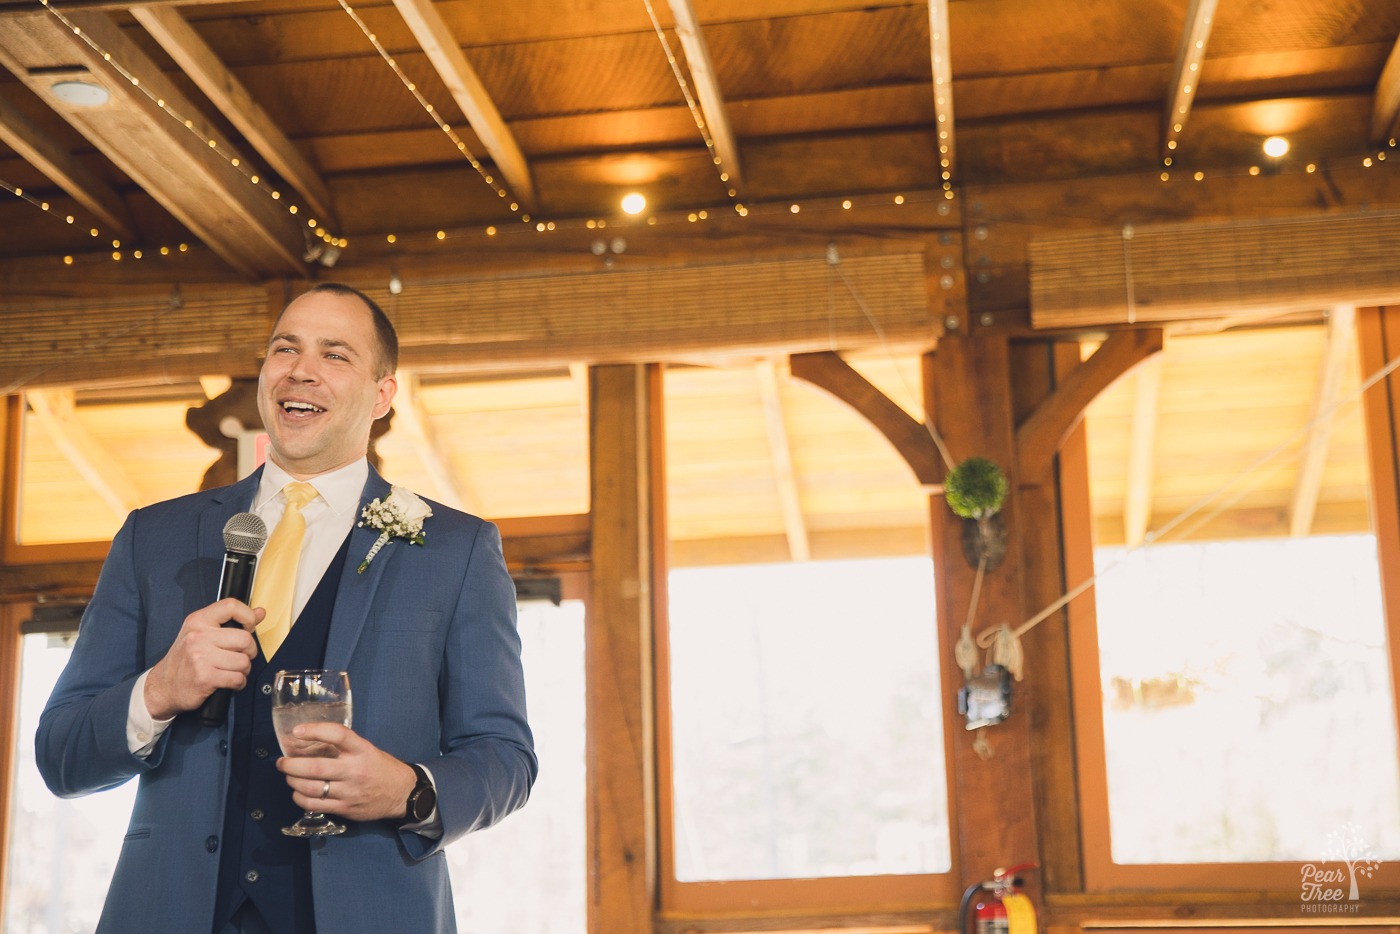 Brother of the bride giving a toast